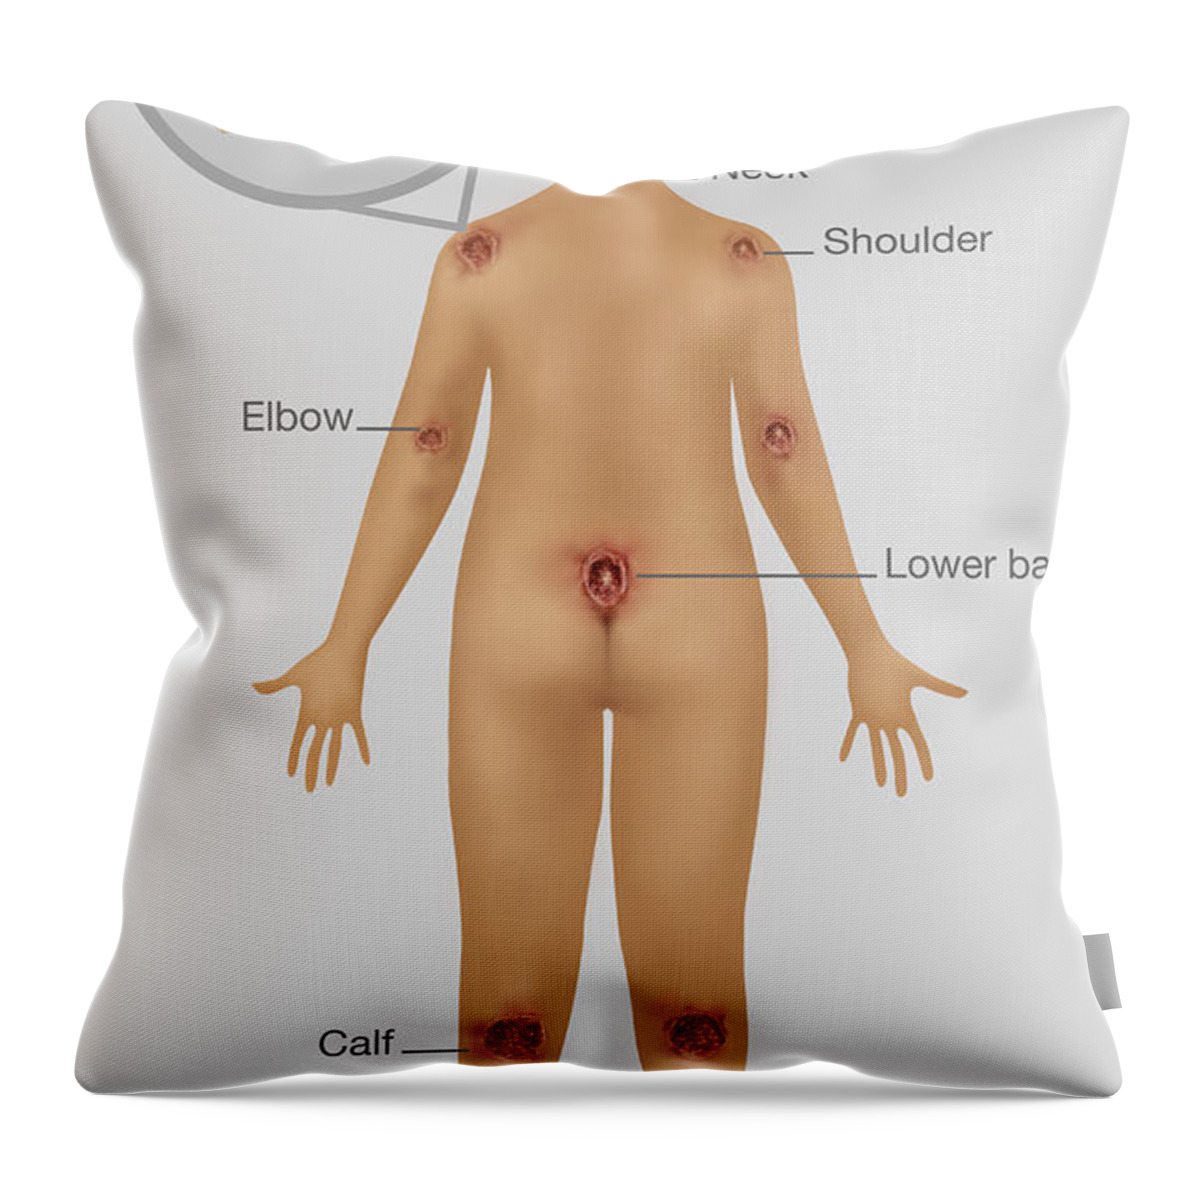 Woman With Pressure Sores, Illustration Throw Pillow by Gwen Shockey -  Pixels